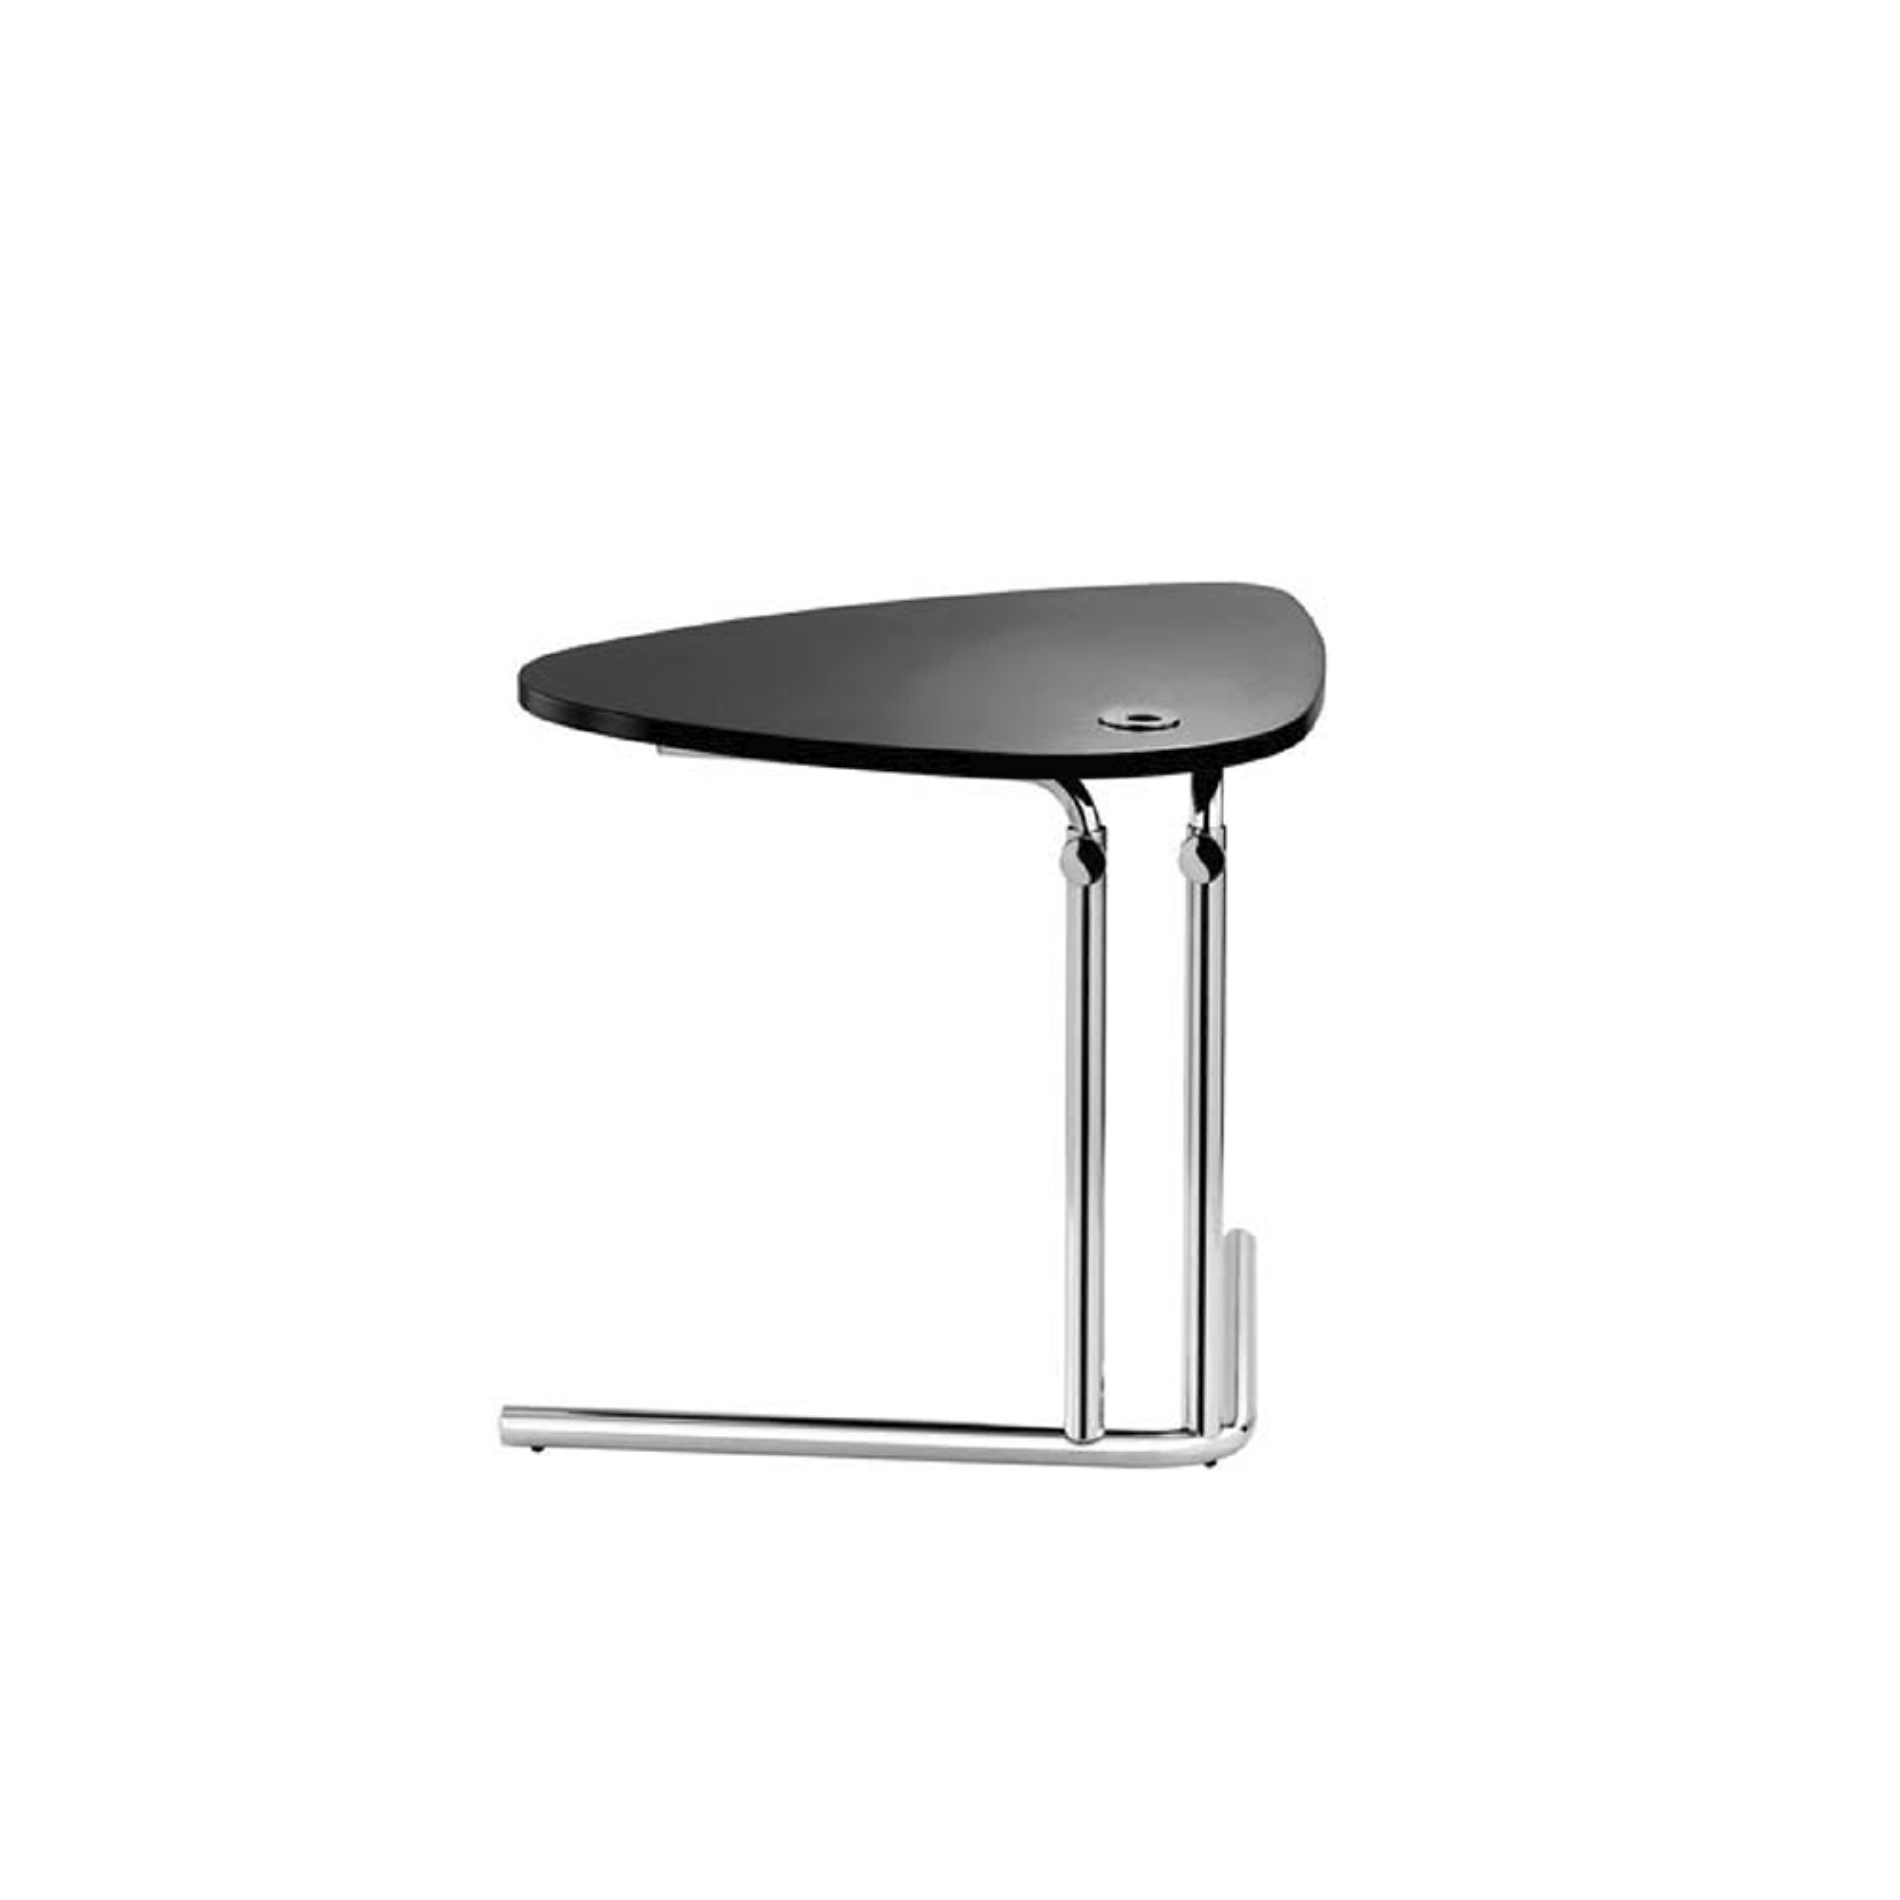 TECTA K22L Mobile Table - Black (Lacquered Wood)